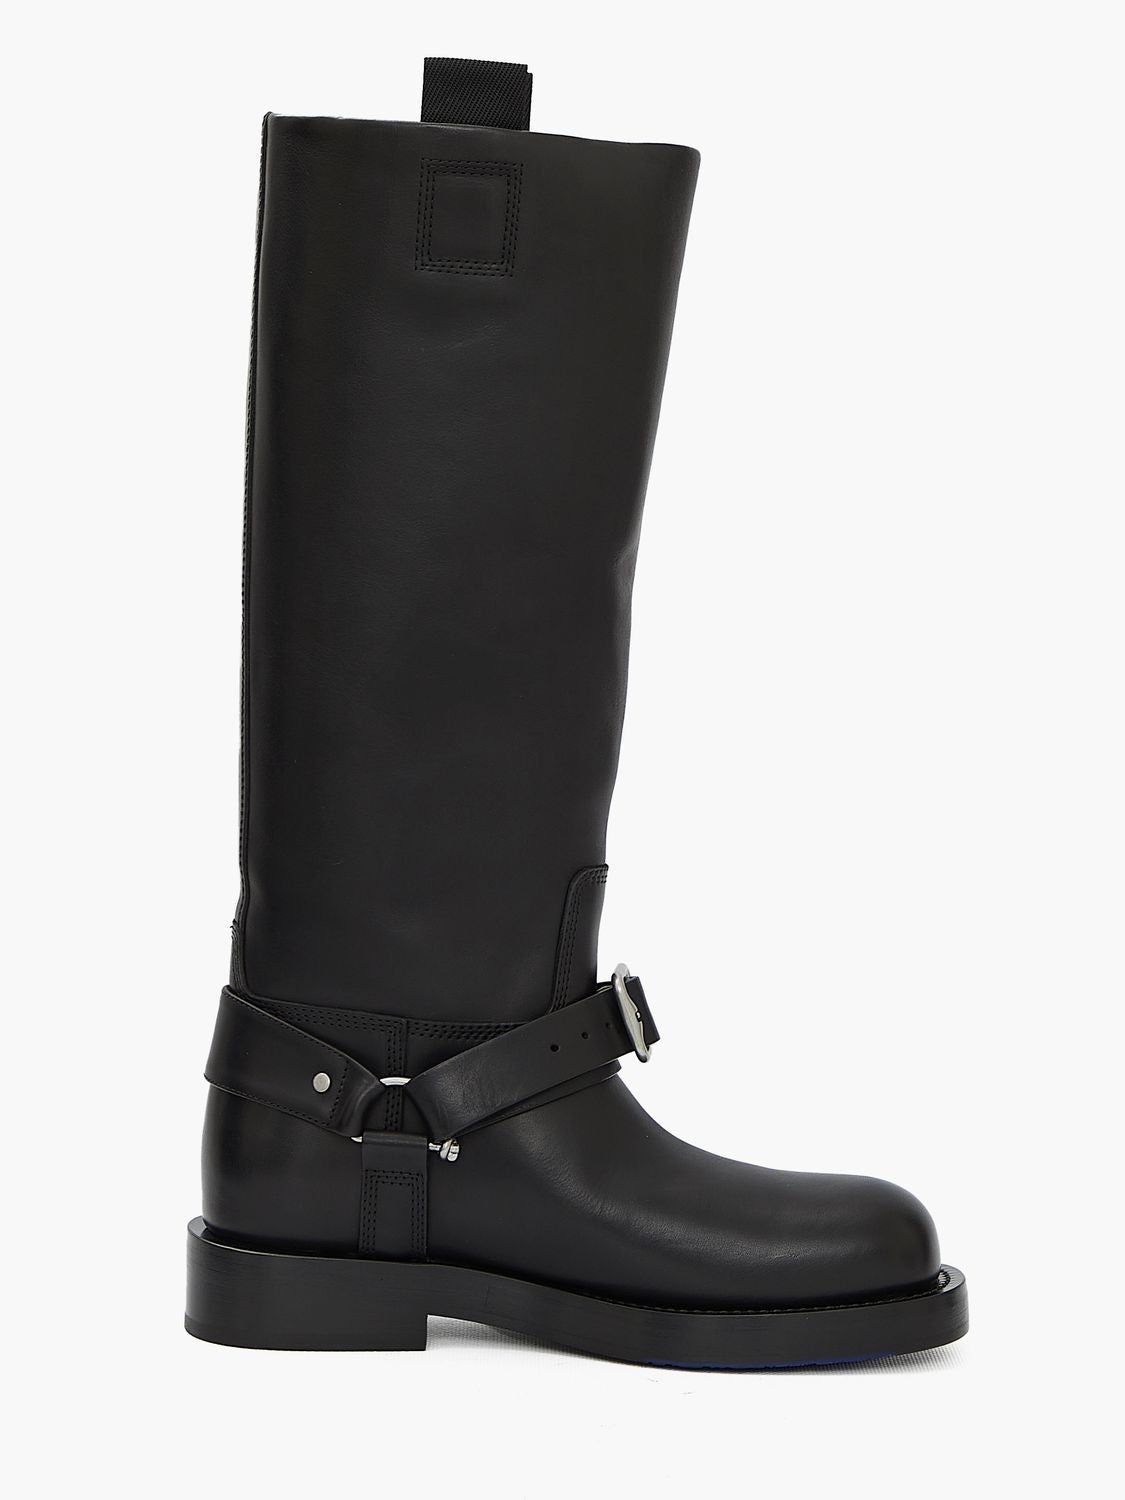 BURBERRY Saddle High Boots in Black Leather with Silver-Tone Buckle Detailing